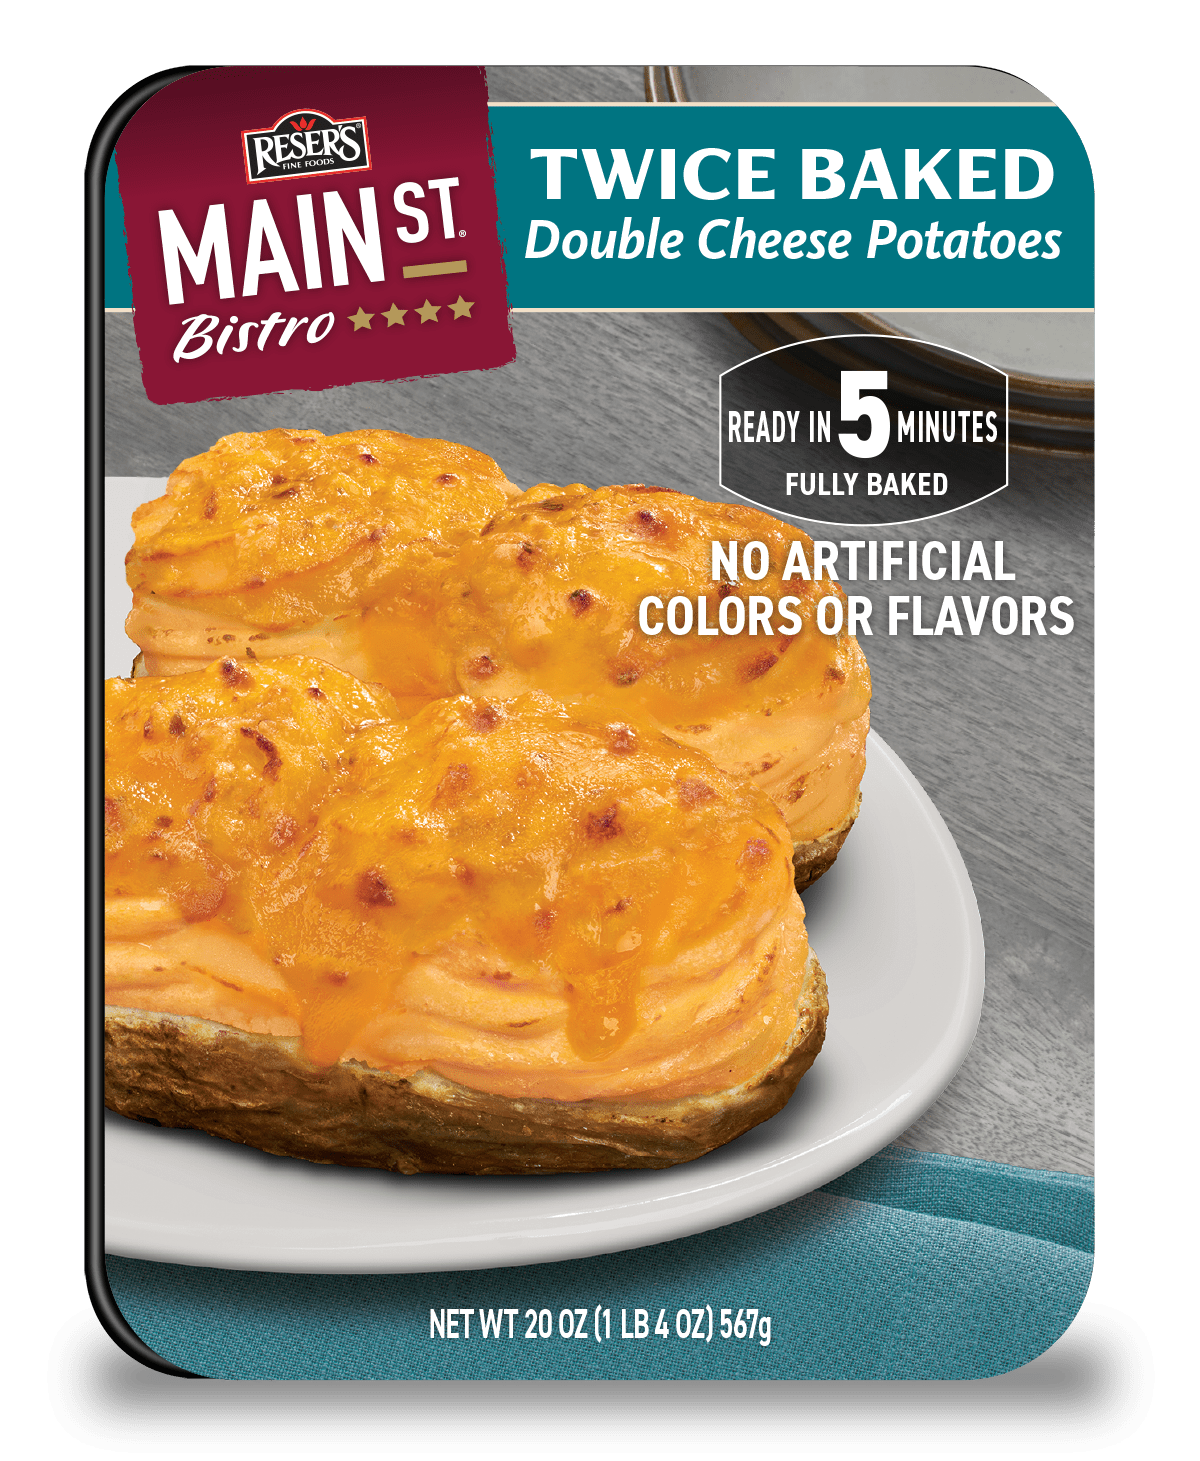 Main St Bistro Twice Baked Double Cheese Potatoes